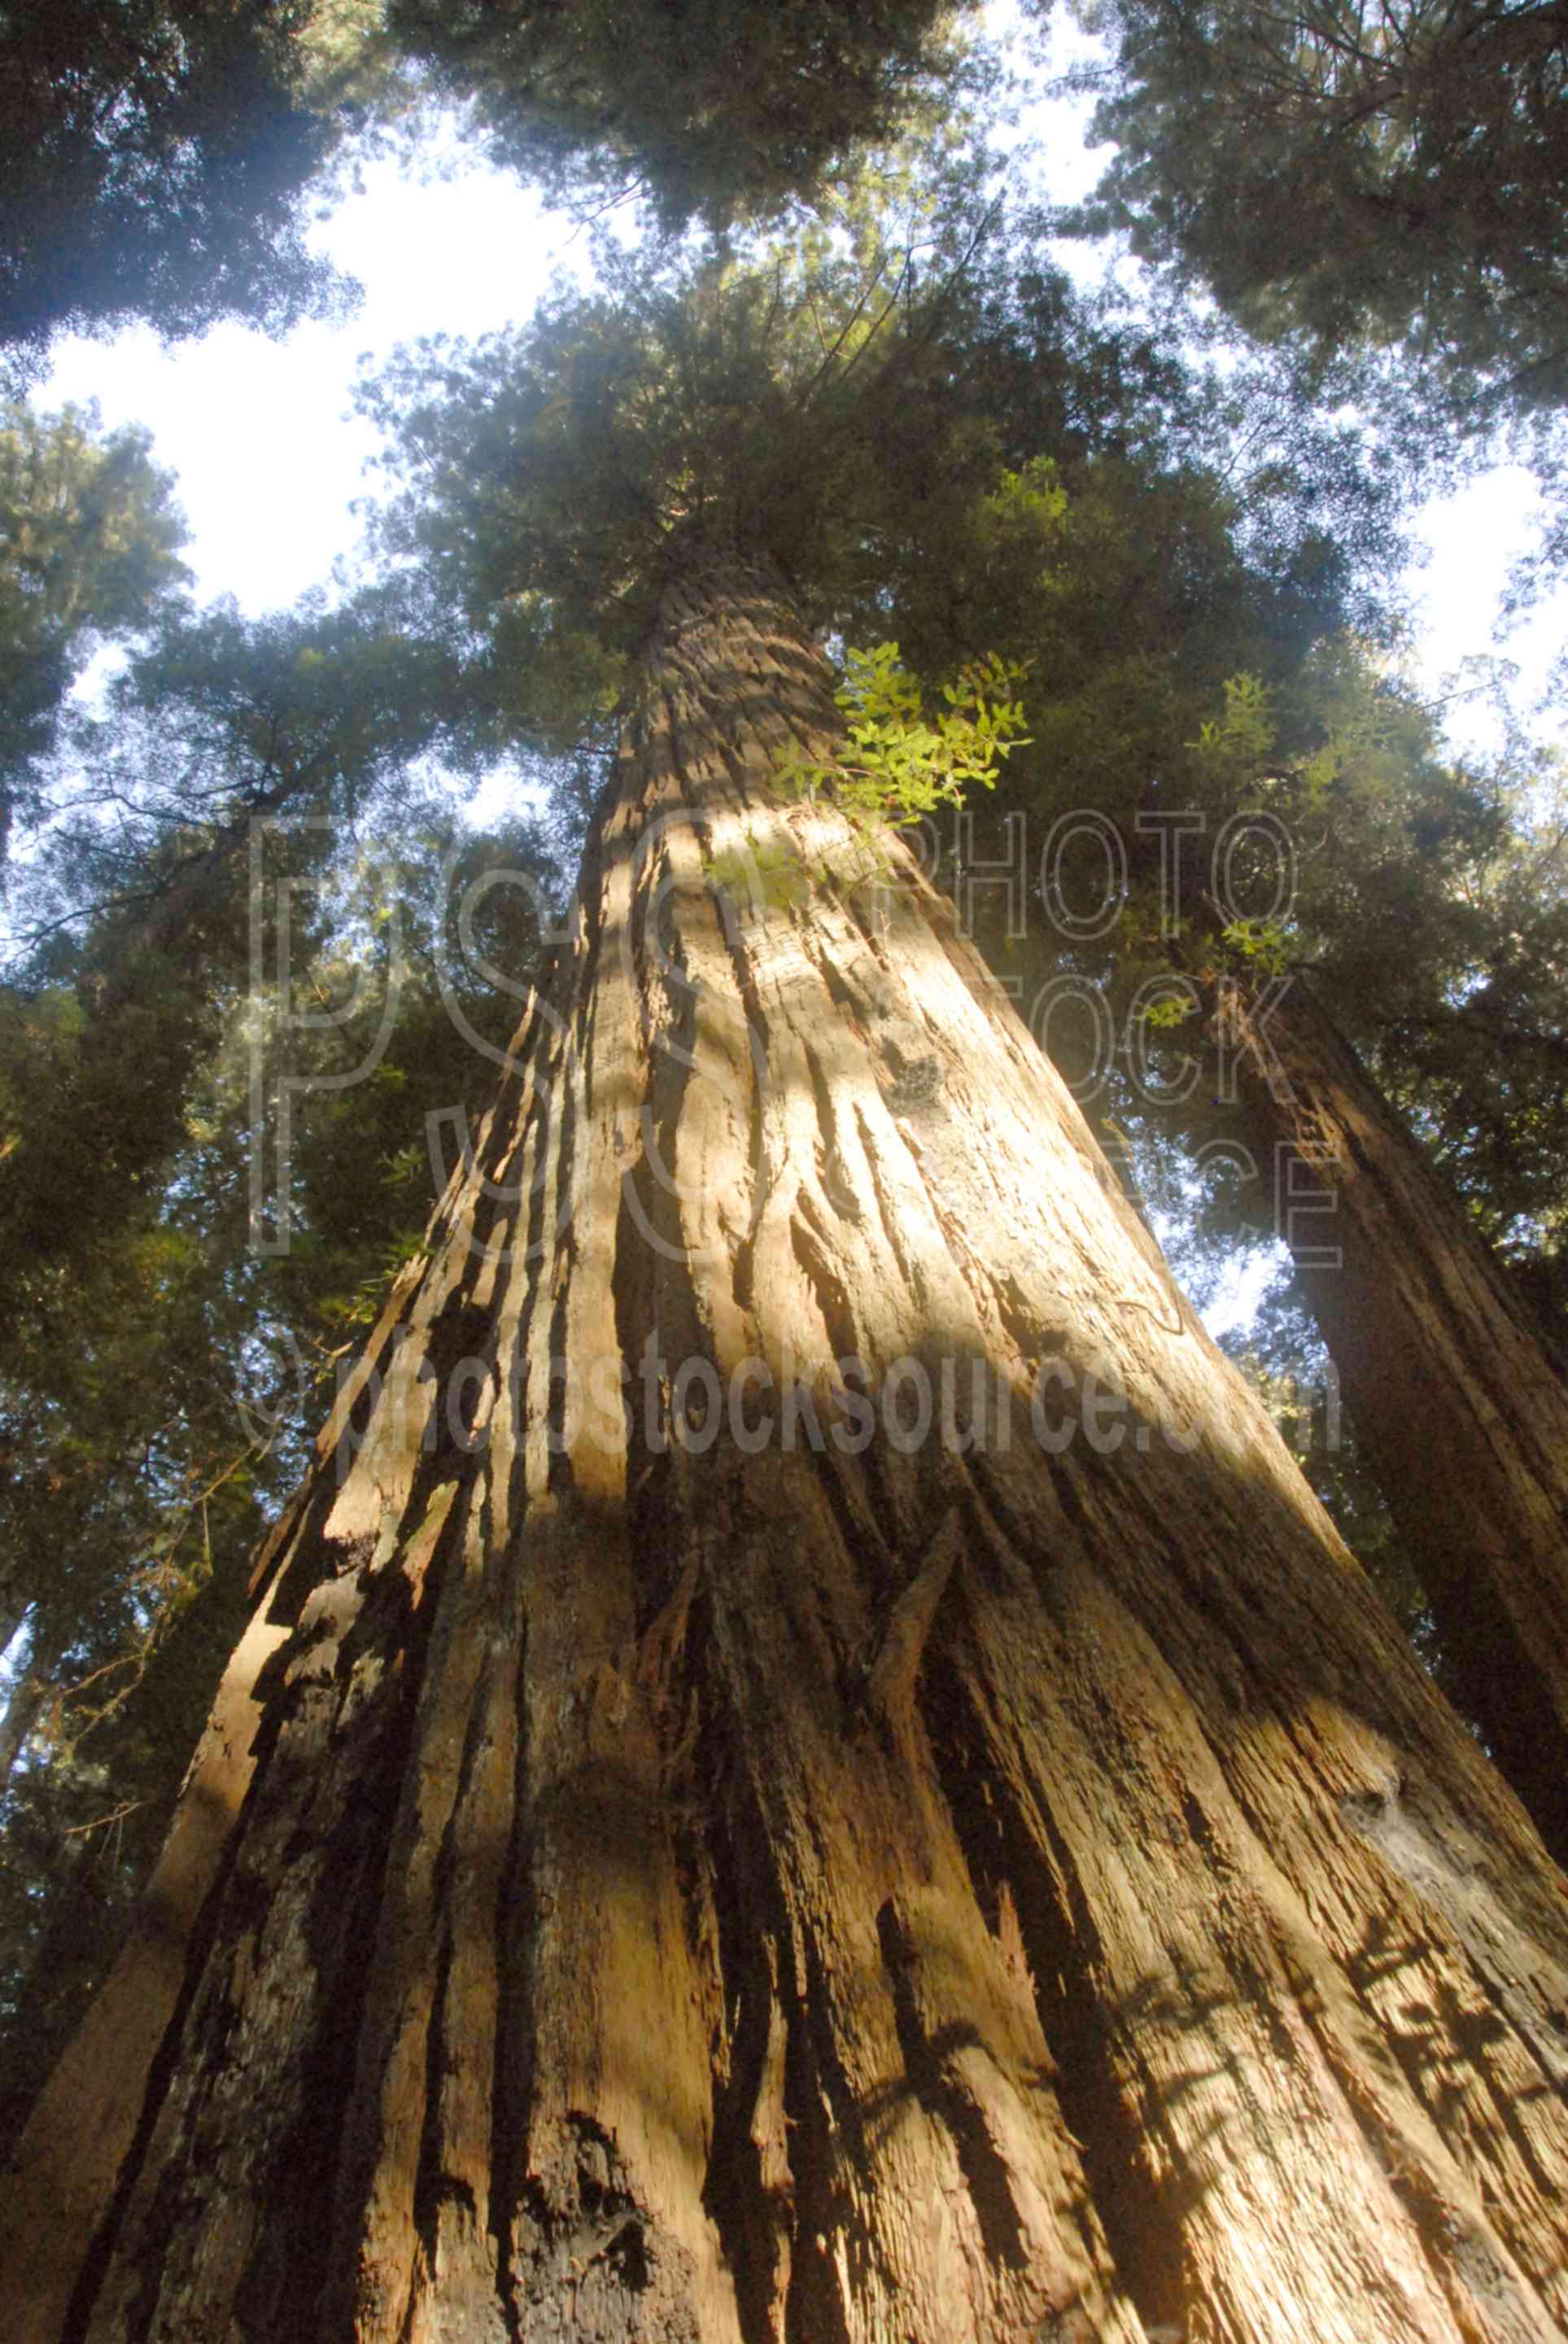 Redwood Trees,tree,giant,redwood,forest,old,ferns,stout grove,forests,nature